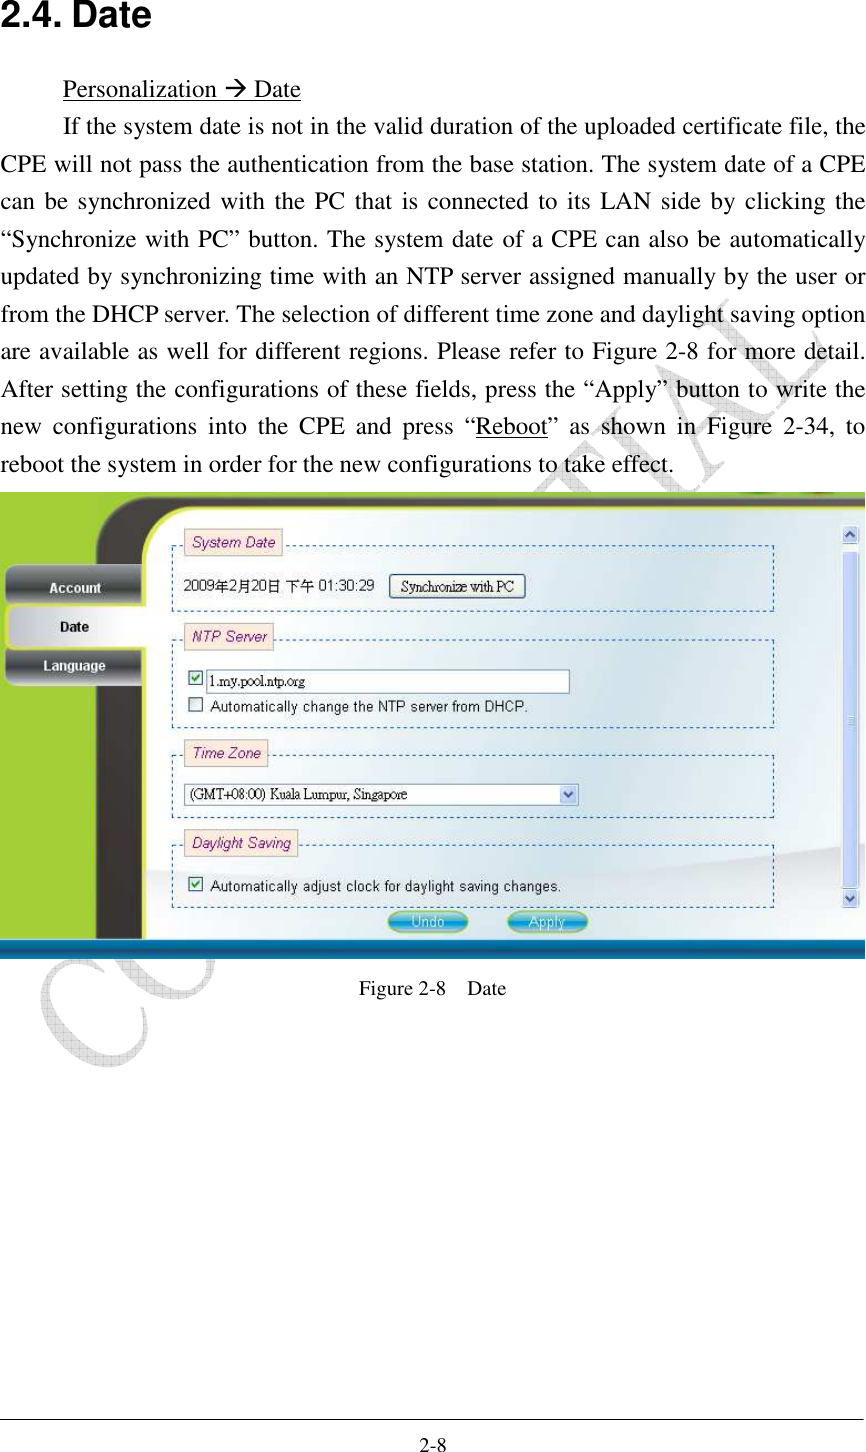    2-8 2.4. Date Personalization  Date If the system date is not in the valid duration of the uploaded certificate file, the CPE will not pass the authentication from the base station. The system date of a CPE can be synchronized with the PC that is connected to its LAN side by clicking the “Synchronize with PC” button. The system date of a CPE can also be automatically updated by synchronizing time with an NTP server assigned manually by the user or from the DHCP server. The selection of different time zone and daylight saving option are available as well for different regions. Please refer to Figure 2-8 for more detail. After setting the configurations of these fields, press the “Apply” button to write the new  configurations  into  the  CPE  and  press  “Reboot”  as  shown  in  Figure  2-34,  to reboot the system in order for the new configurations to take effect.  Figure 2-8    Date  